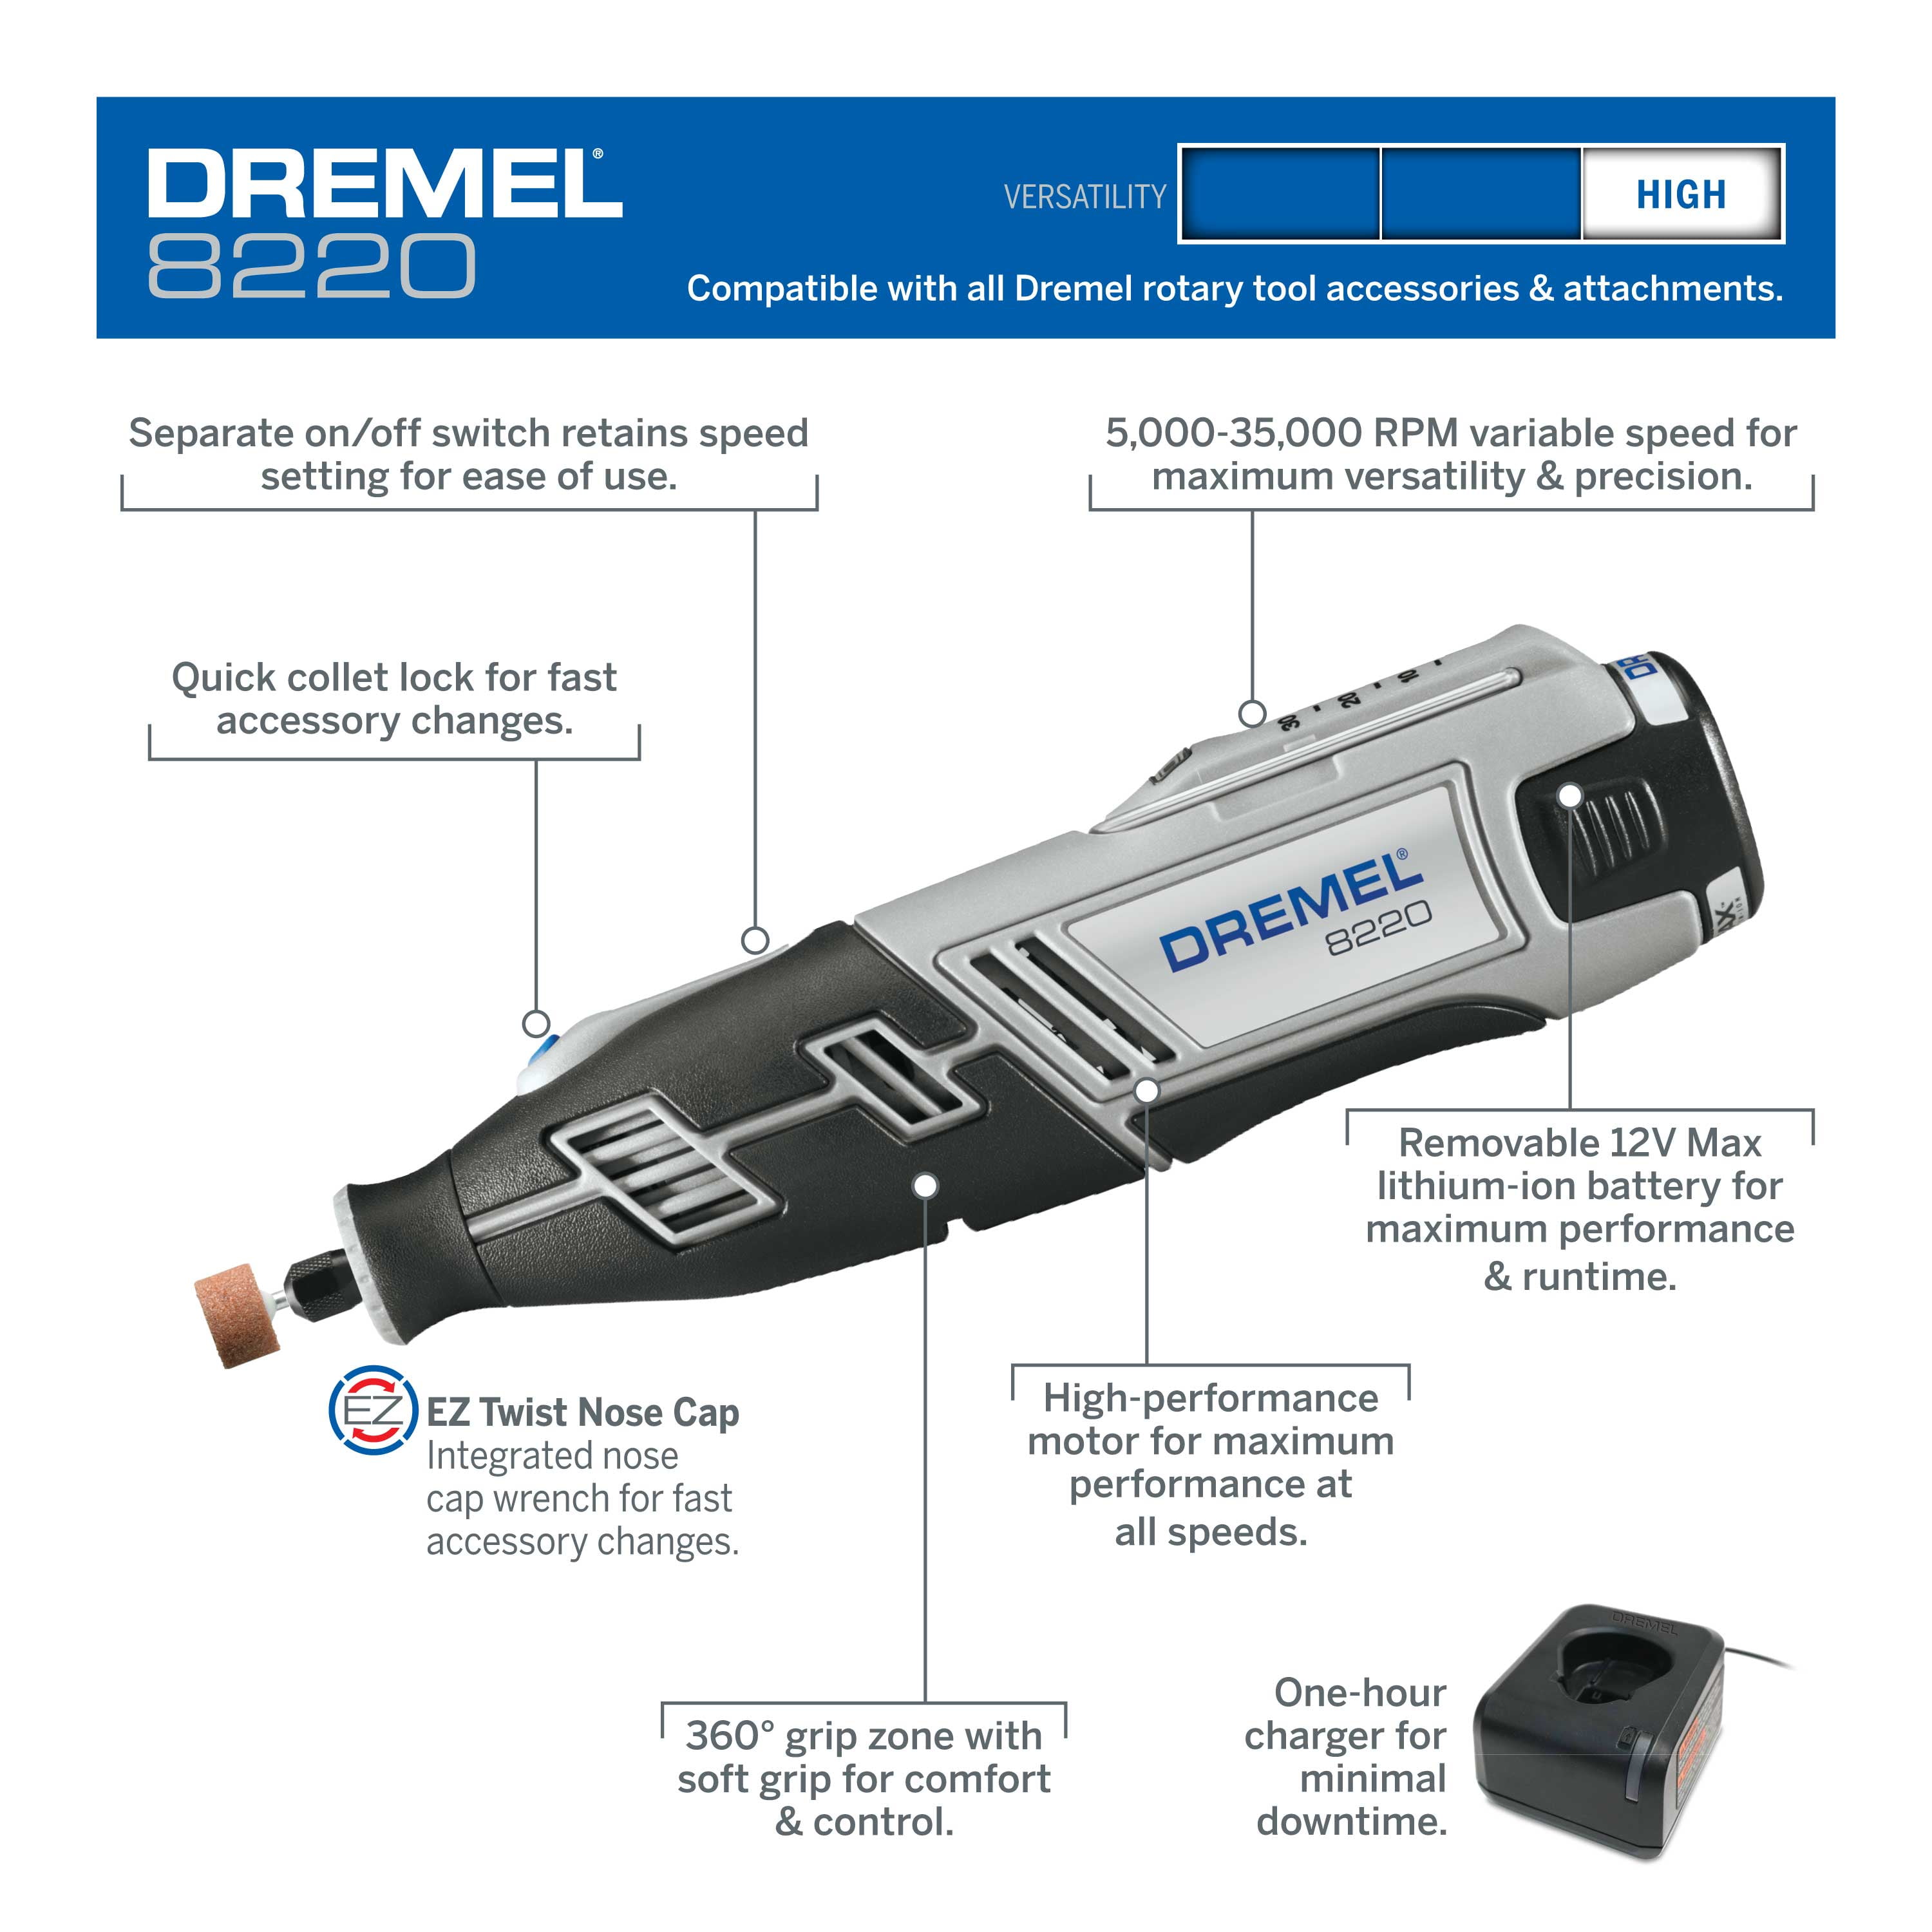 Shop Dremel 8220 Cordless 12V Variable Speed Rotary Tool with 1 Attachment  and 28 Accessories + 11-Piece EZ Lock Cutting Accessory Kit at